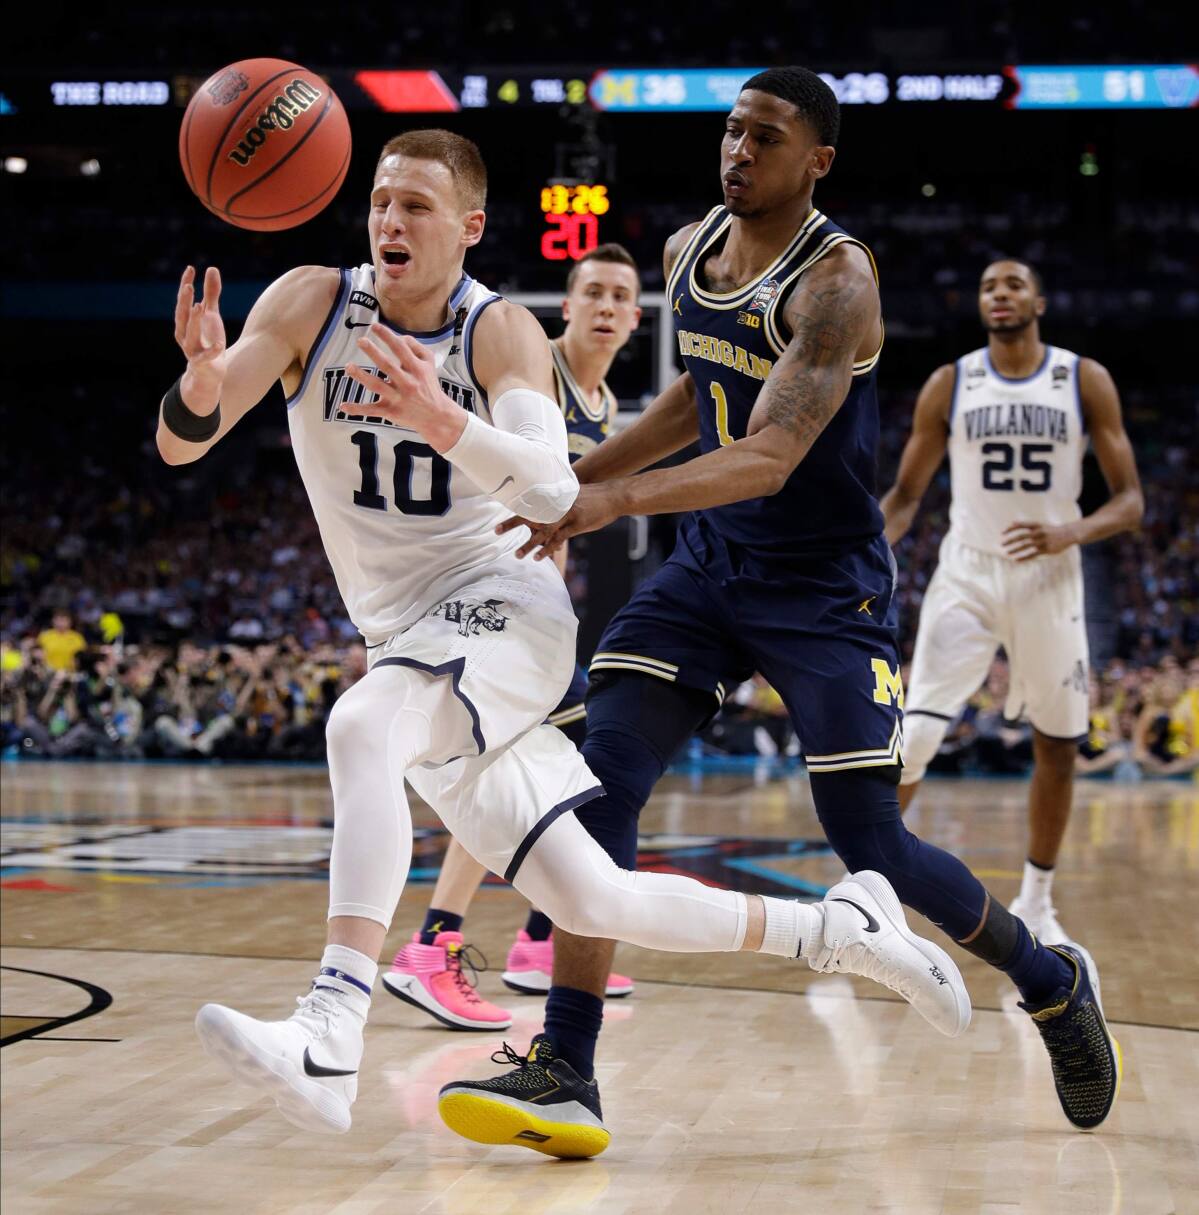 DiVincenzo leaves Villanova, aims to be first-round pick – The Times Herald